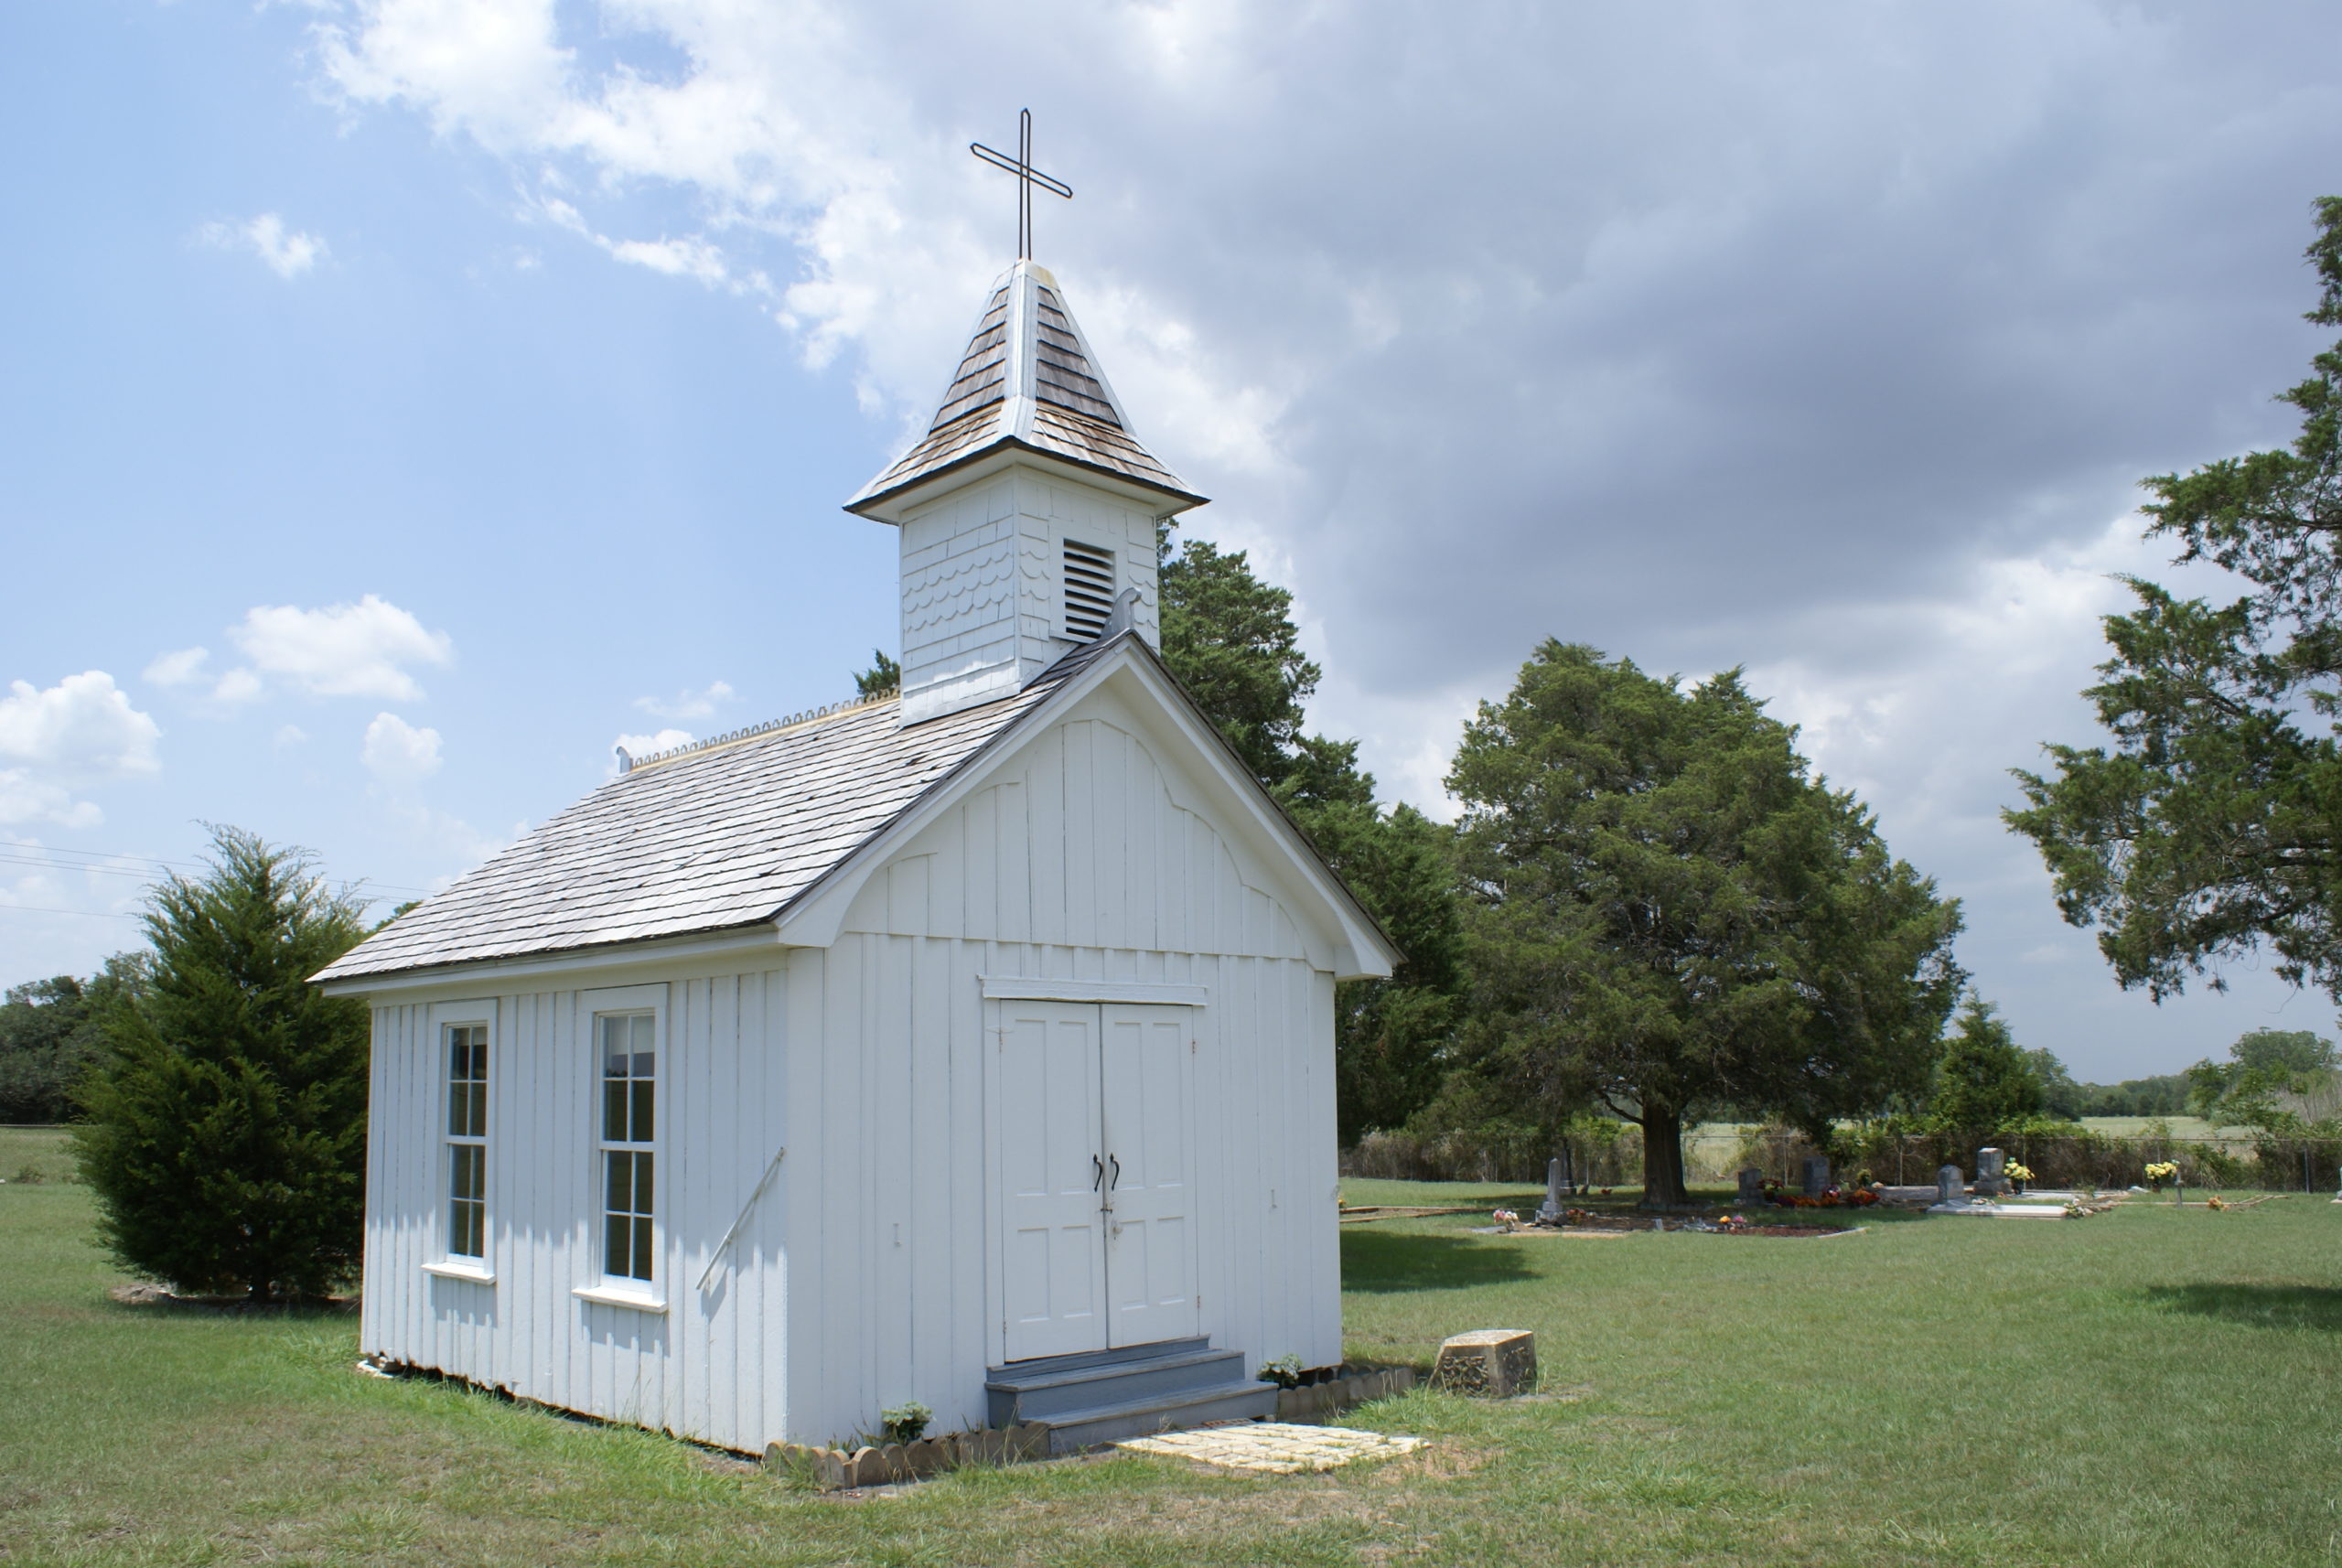 An tiny old, white-painted rustic wooden chapel stands in a Texas field under a sky with storm clouds rolling in.